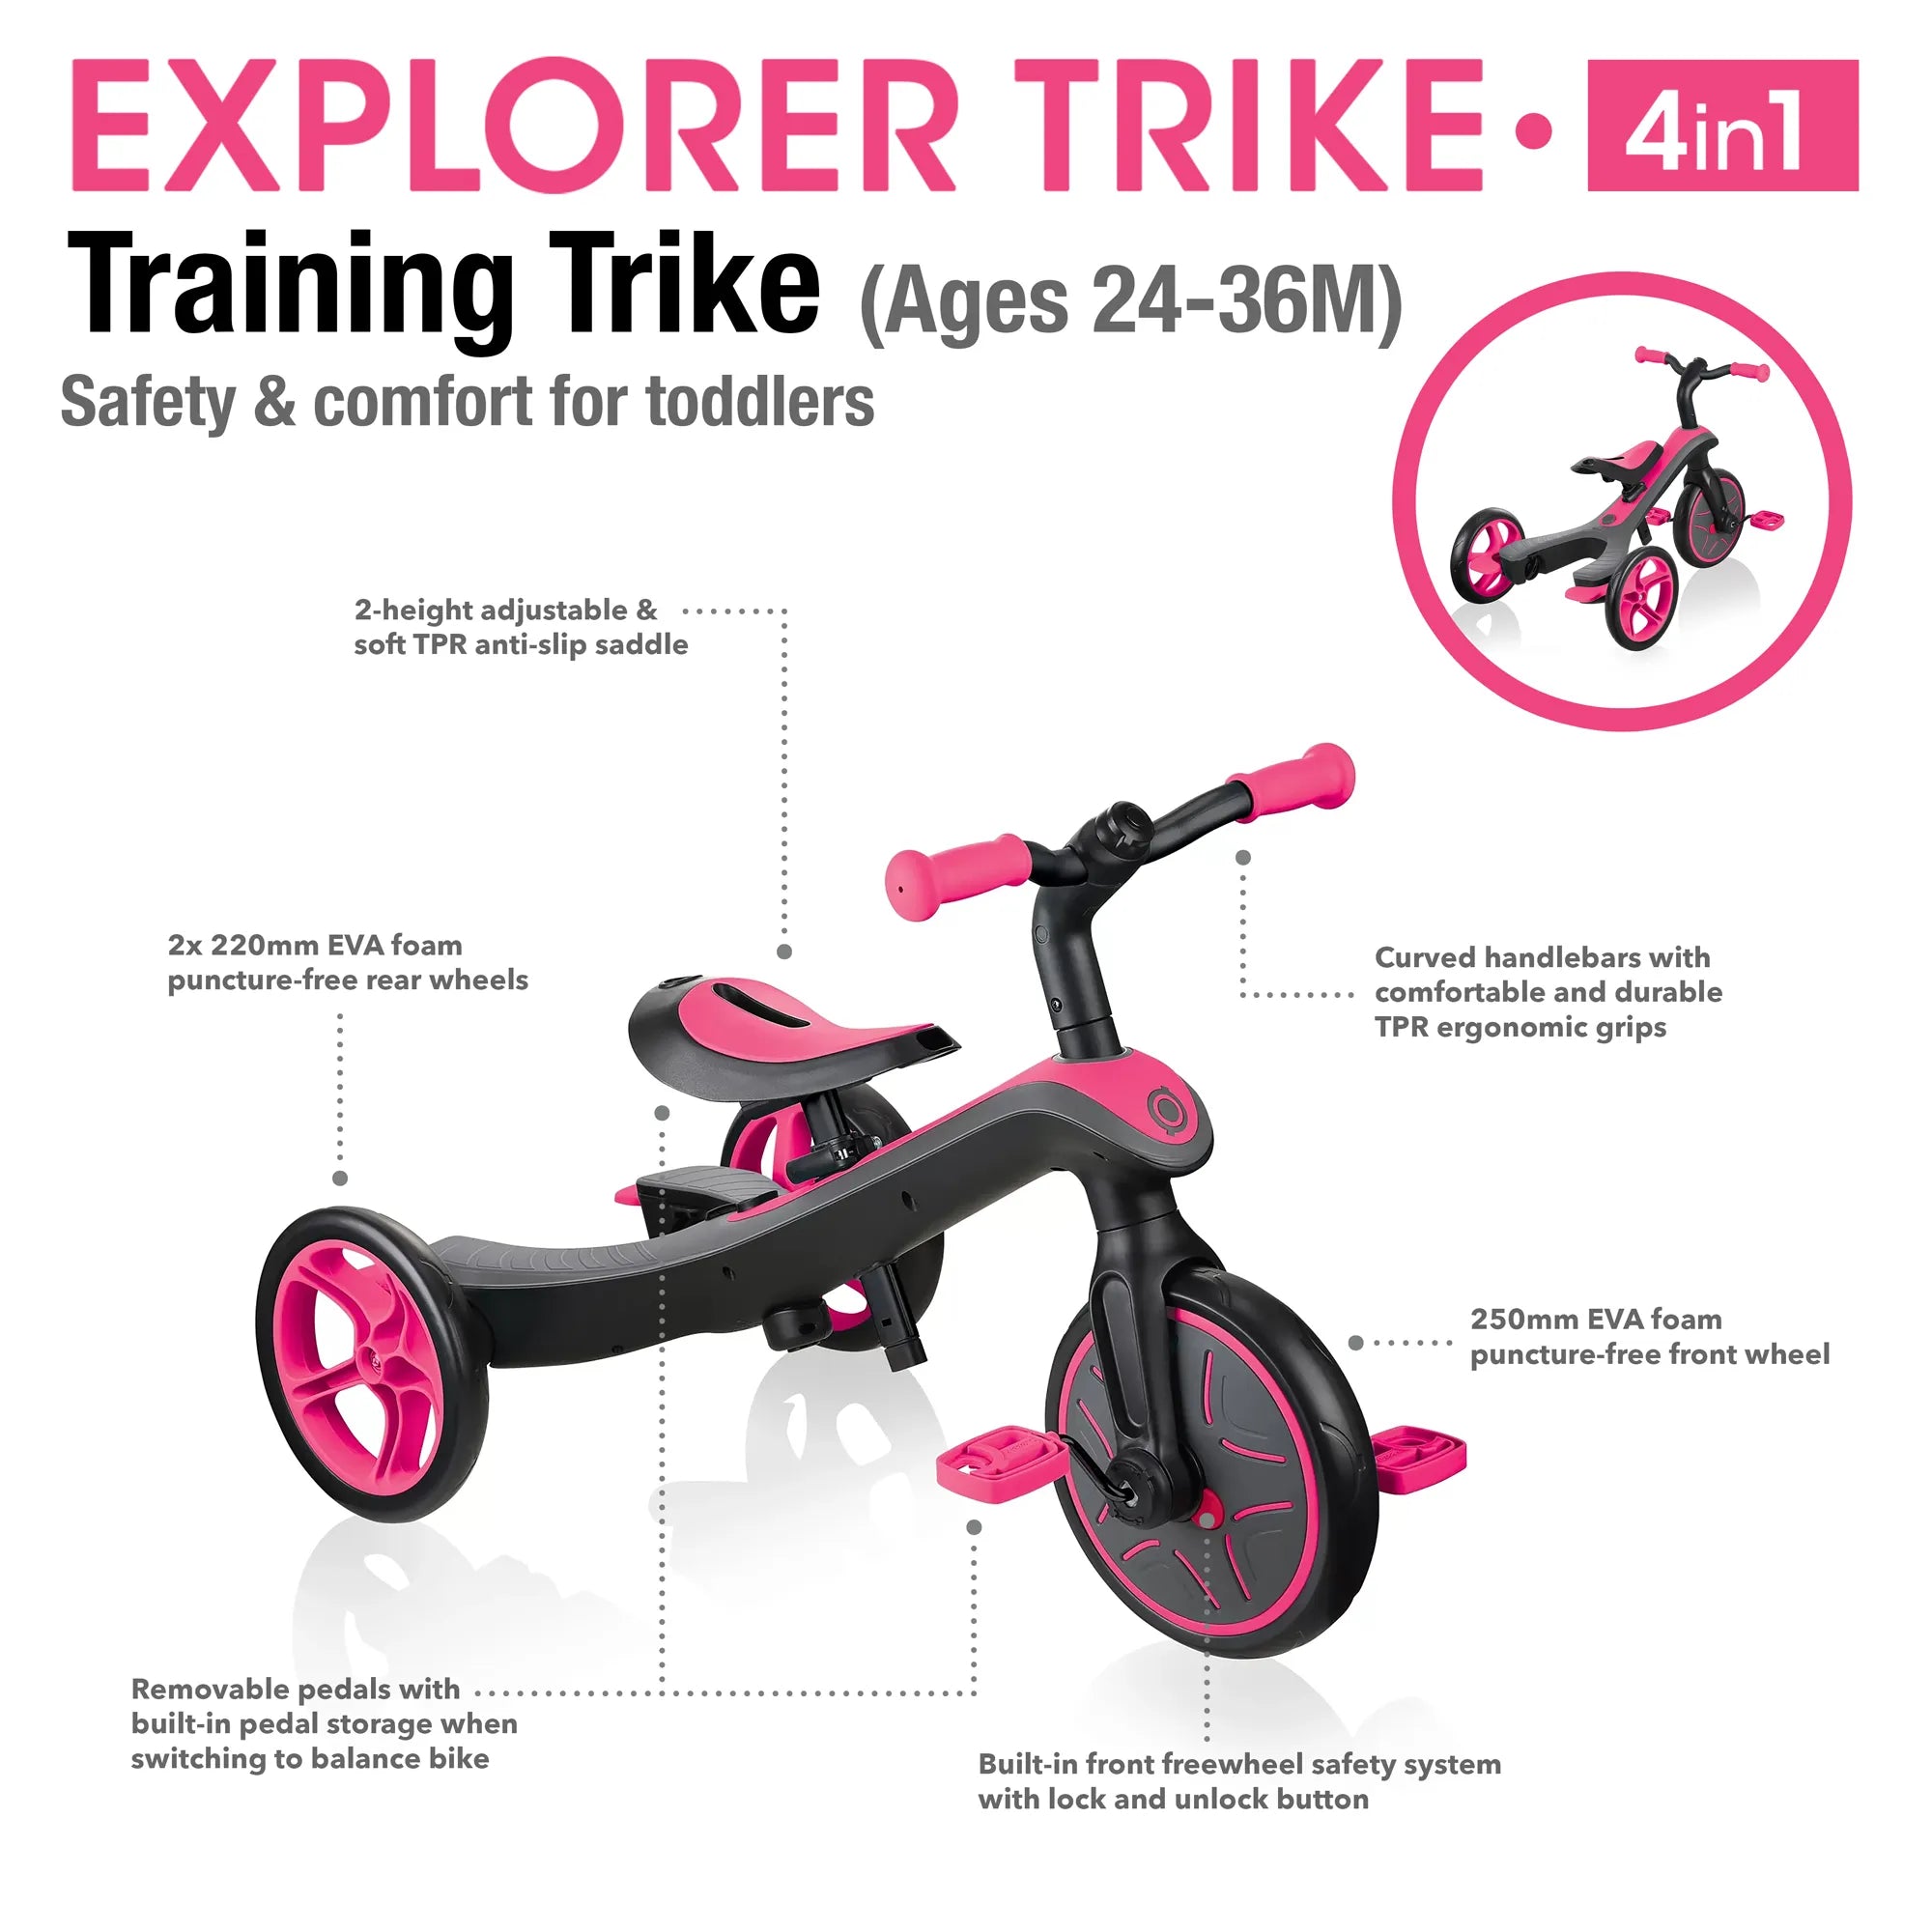 Globber Explorer Trike 4 in 1, Fuschia Pink, Training Trike Mode, Front and Rear Views, with Features, Browns Hobby & Game.